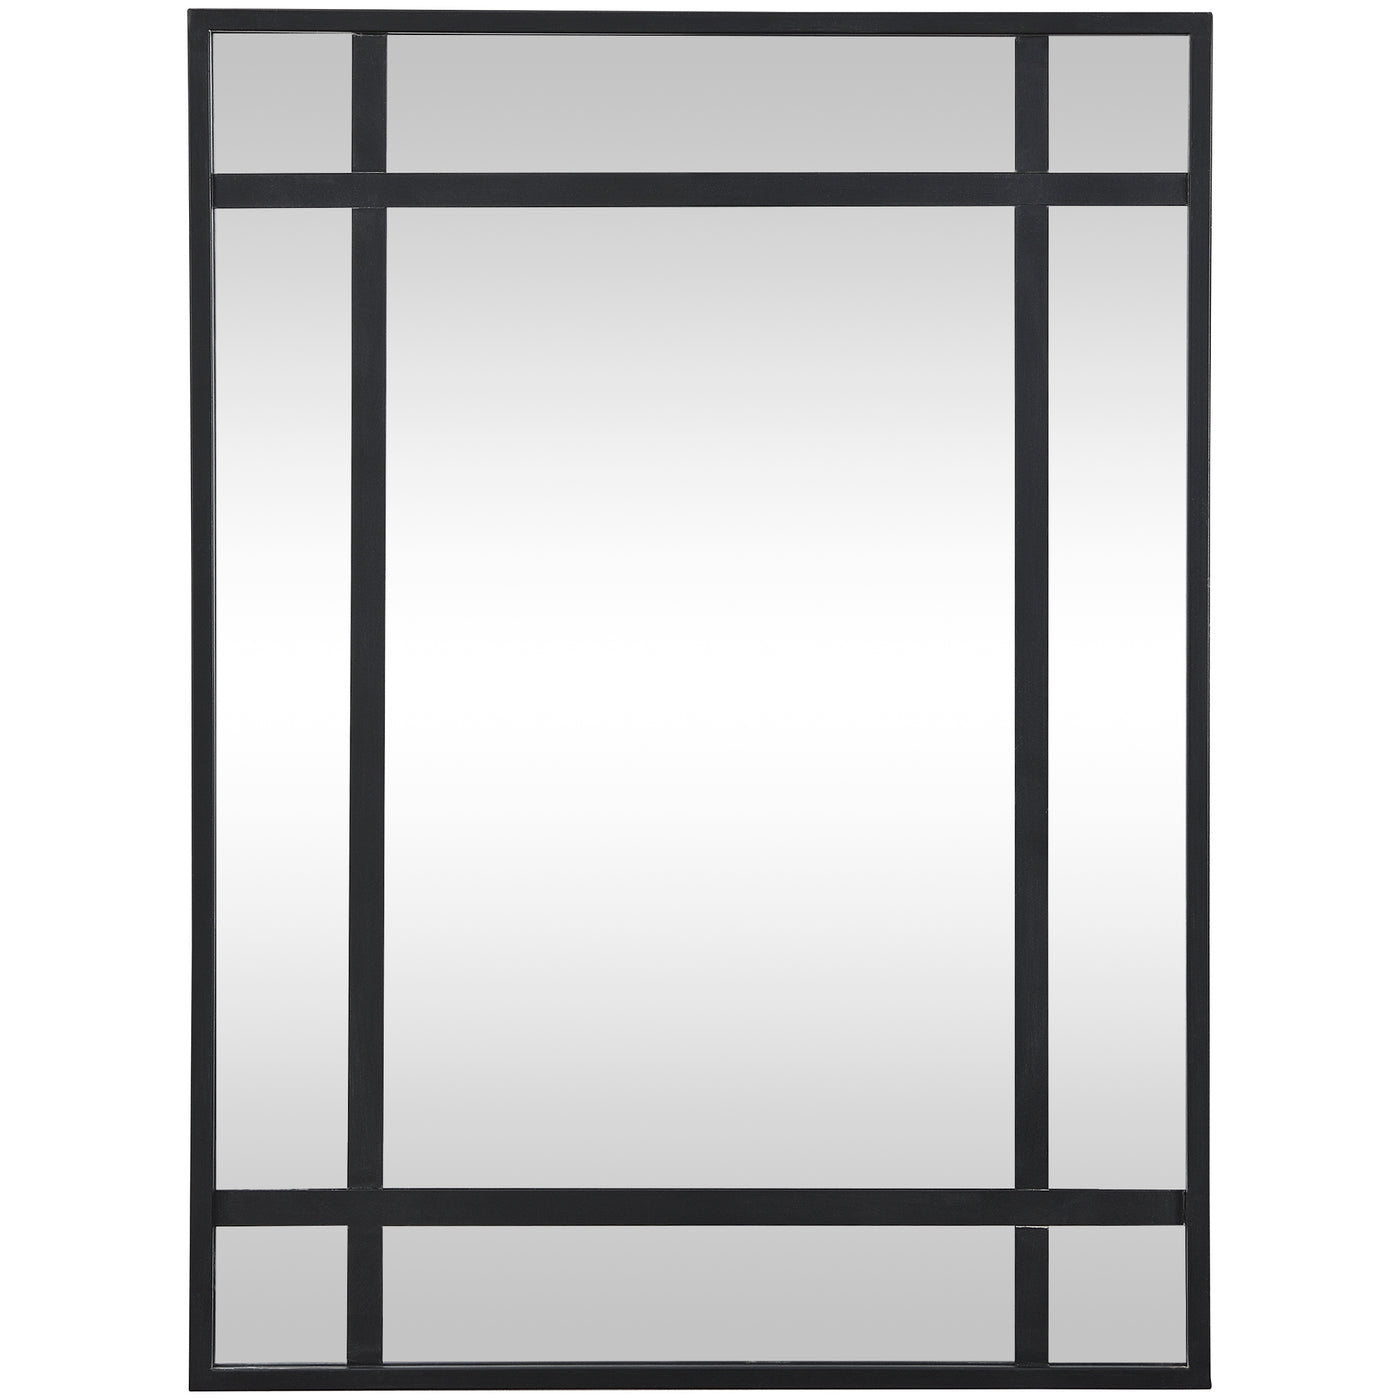 FirsTime & Co. Black Melbourne Wall Mirror, Modern Style, Made of Metal